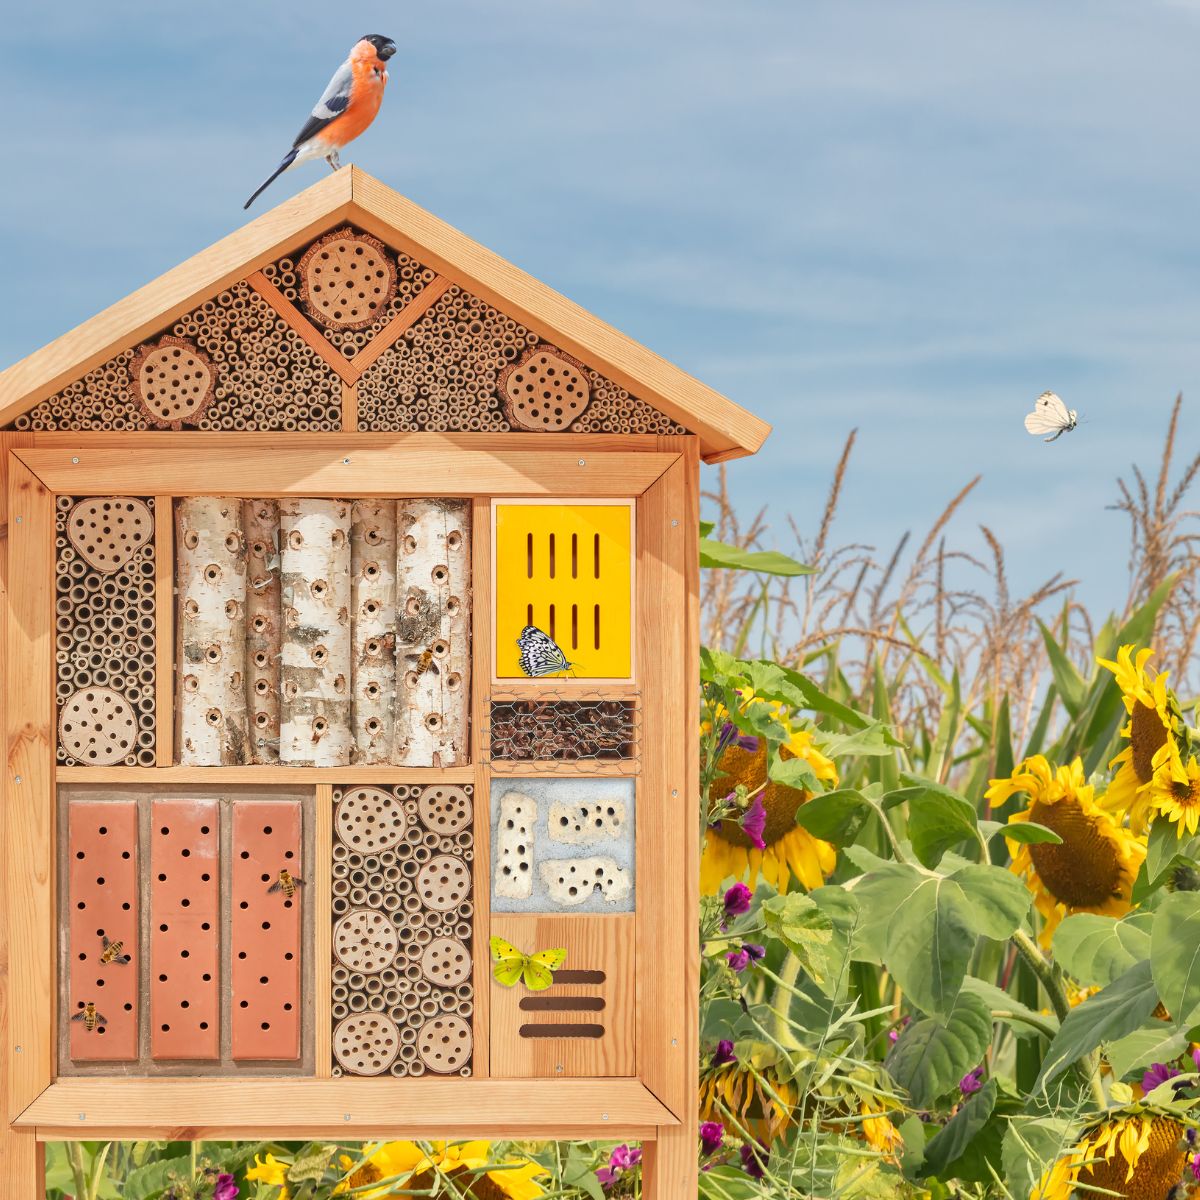 A colorful bird is standing on top of an insect hotel surrounded by sunflowers.  